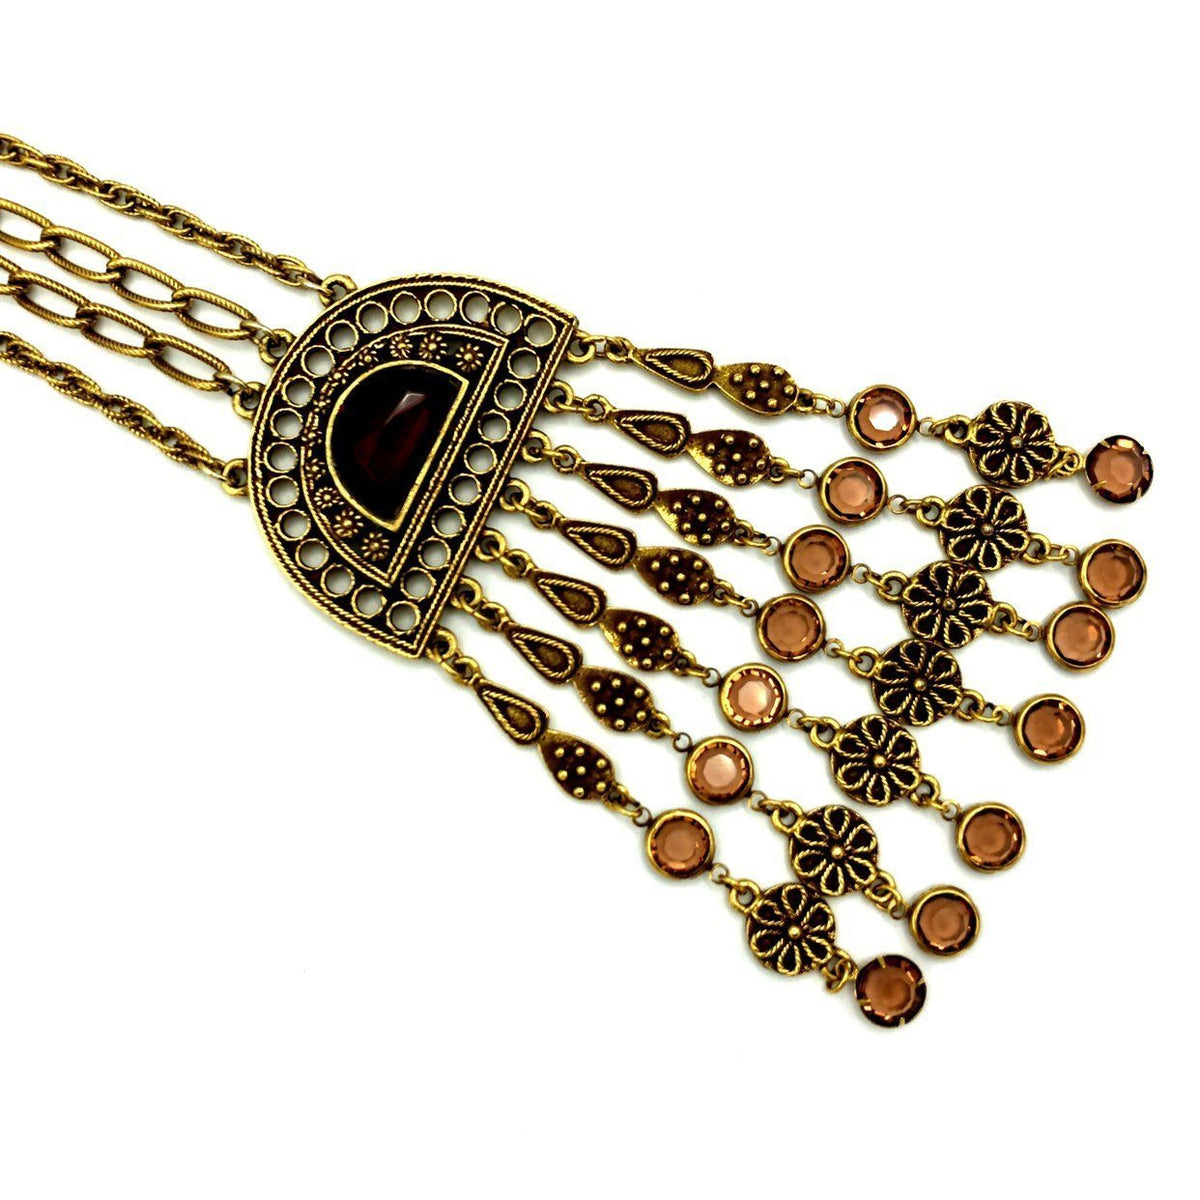 Stunning Goldette Etruscan Gold Waterfall Fringe Pendant - 24 Wishes Vintage Jewelry